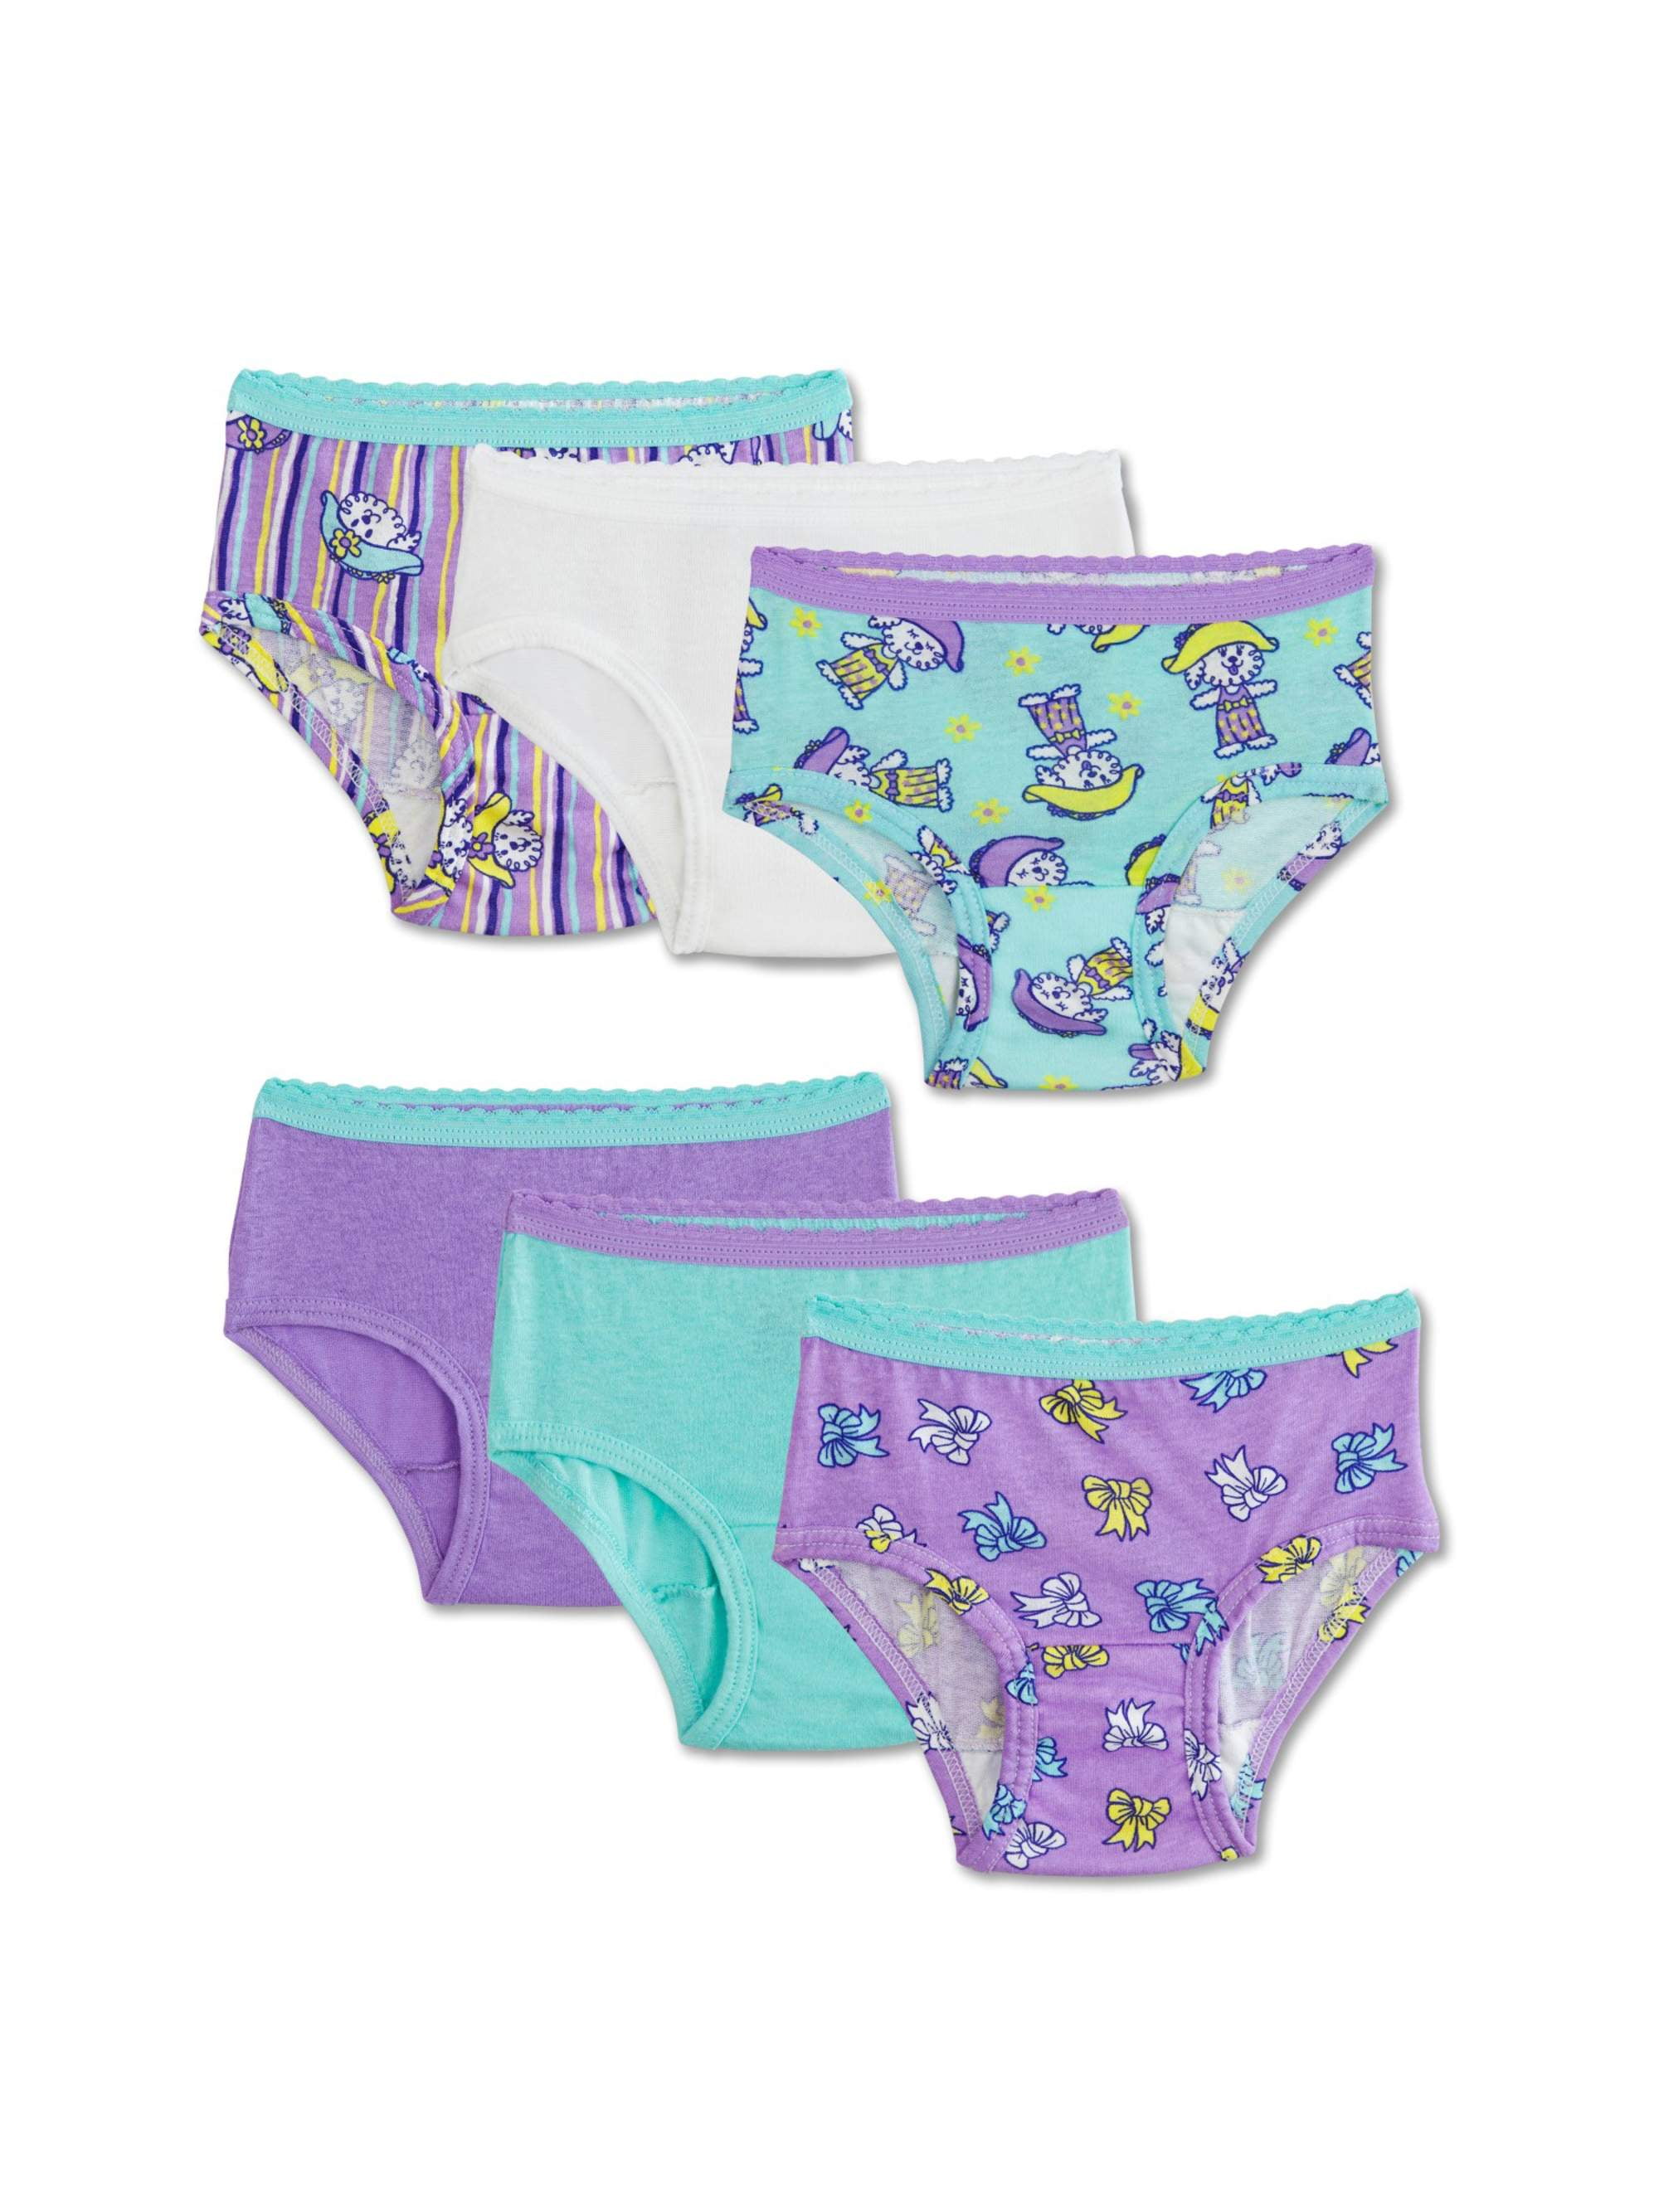 Fruit of the Loom Girls Assorted Cotton Brief Underwear 18 Pack Panties Size 6 